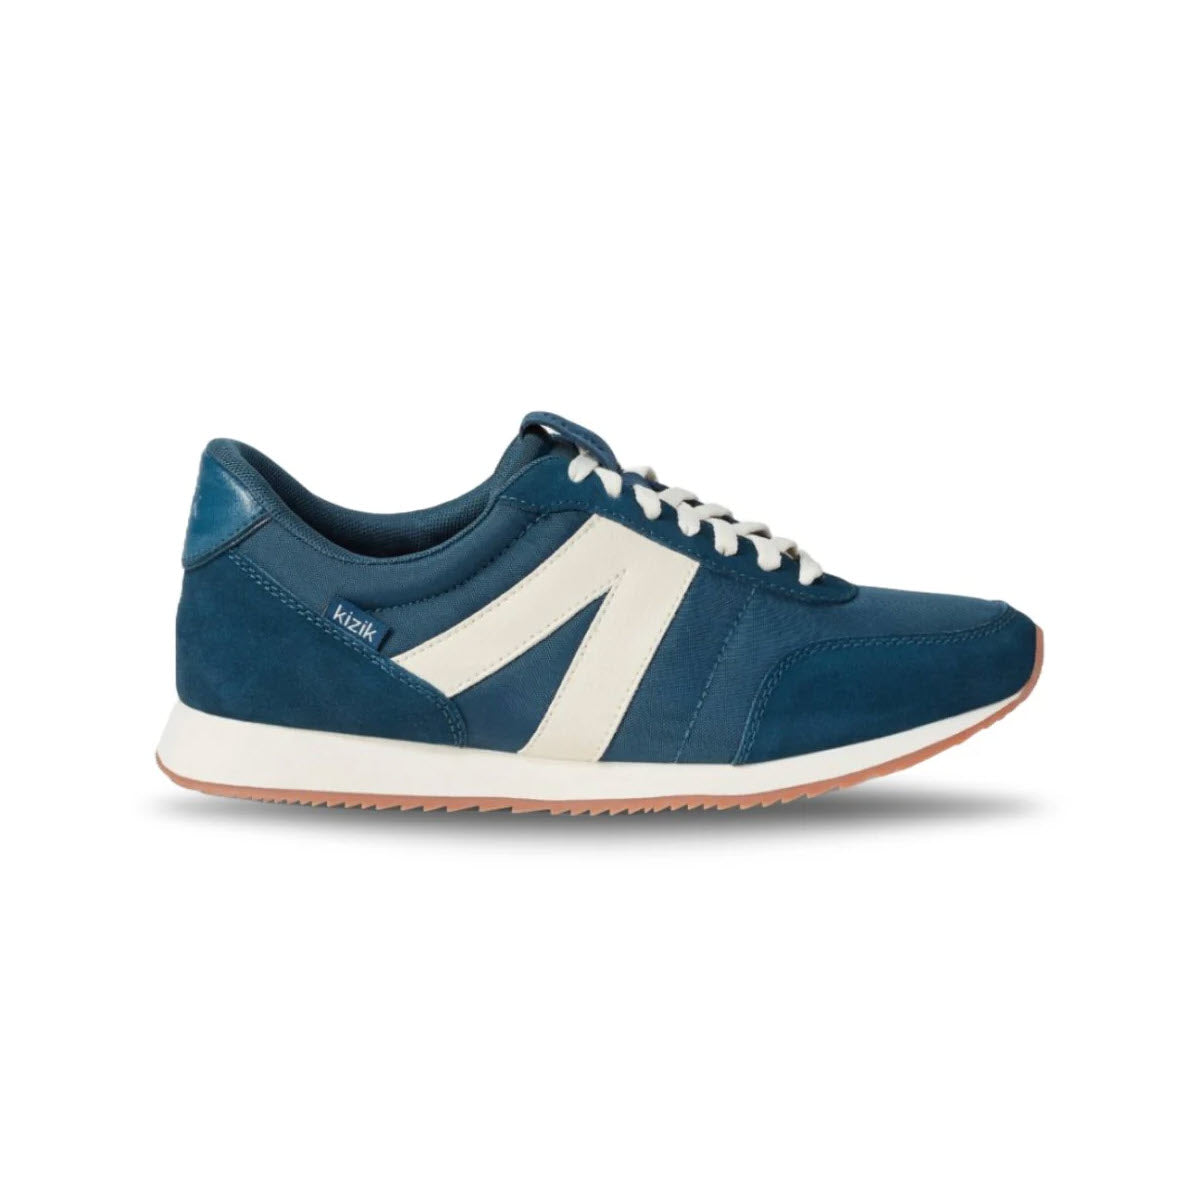 A side view of a comfortable Kizik Milan Tidepool - Adult sneaker with white accents and a logo, featuring a lace-up design and a flat rubber sole.